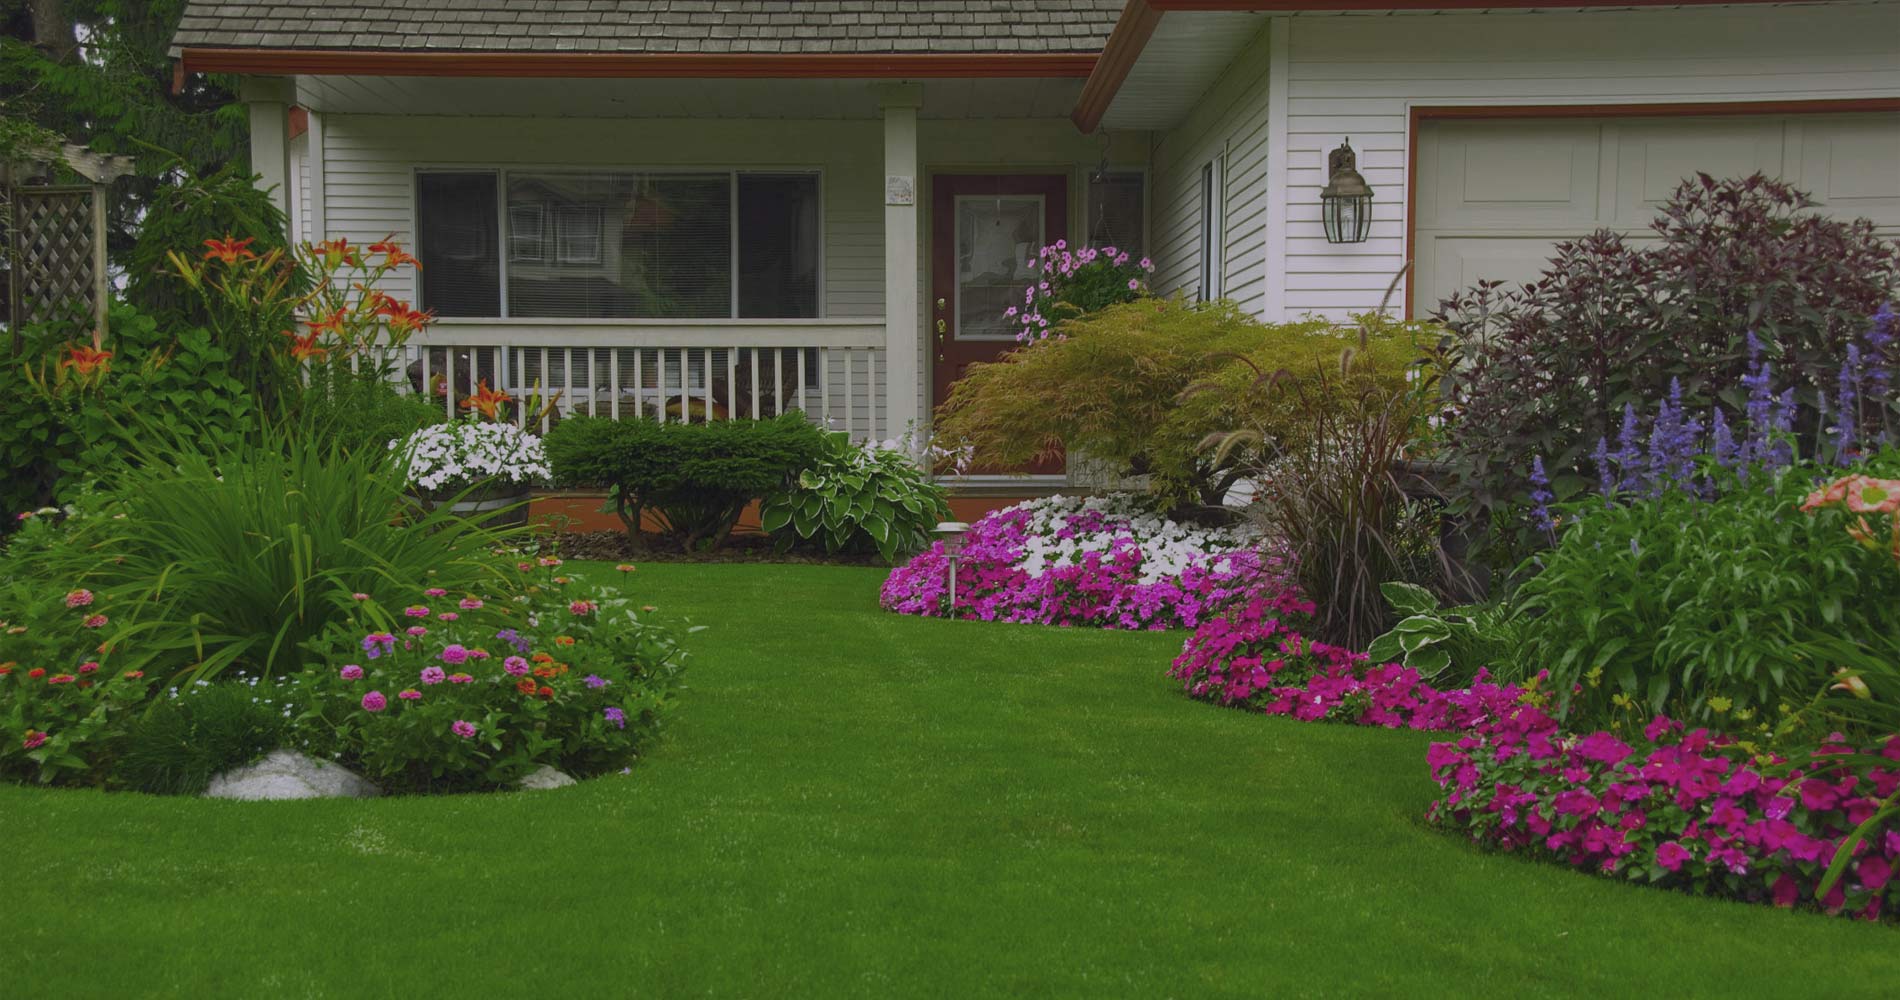 Landscaping & Lawn Care Services | South Jersey